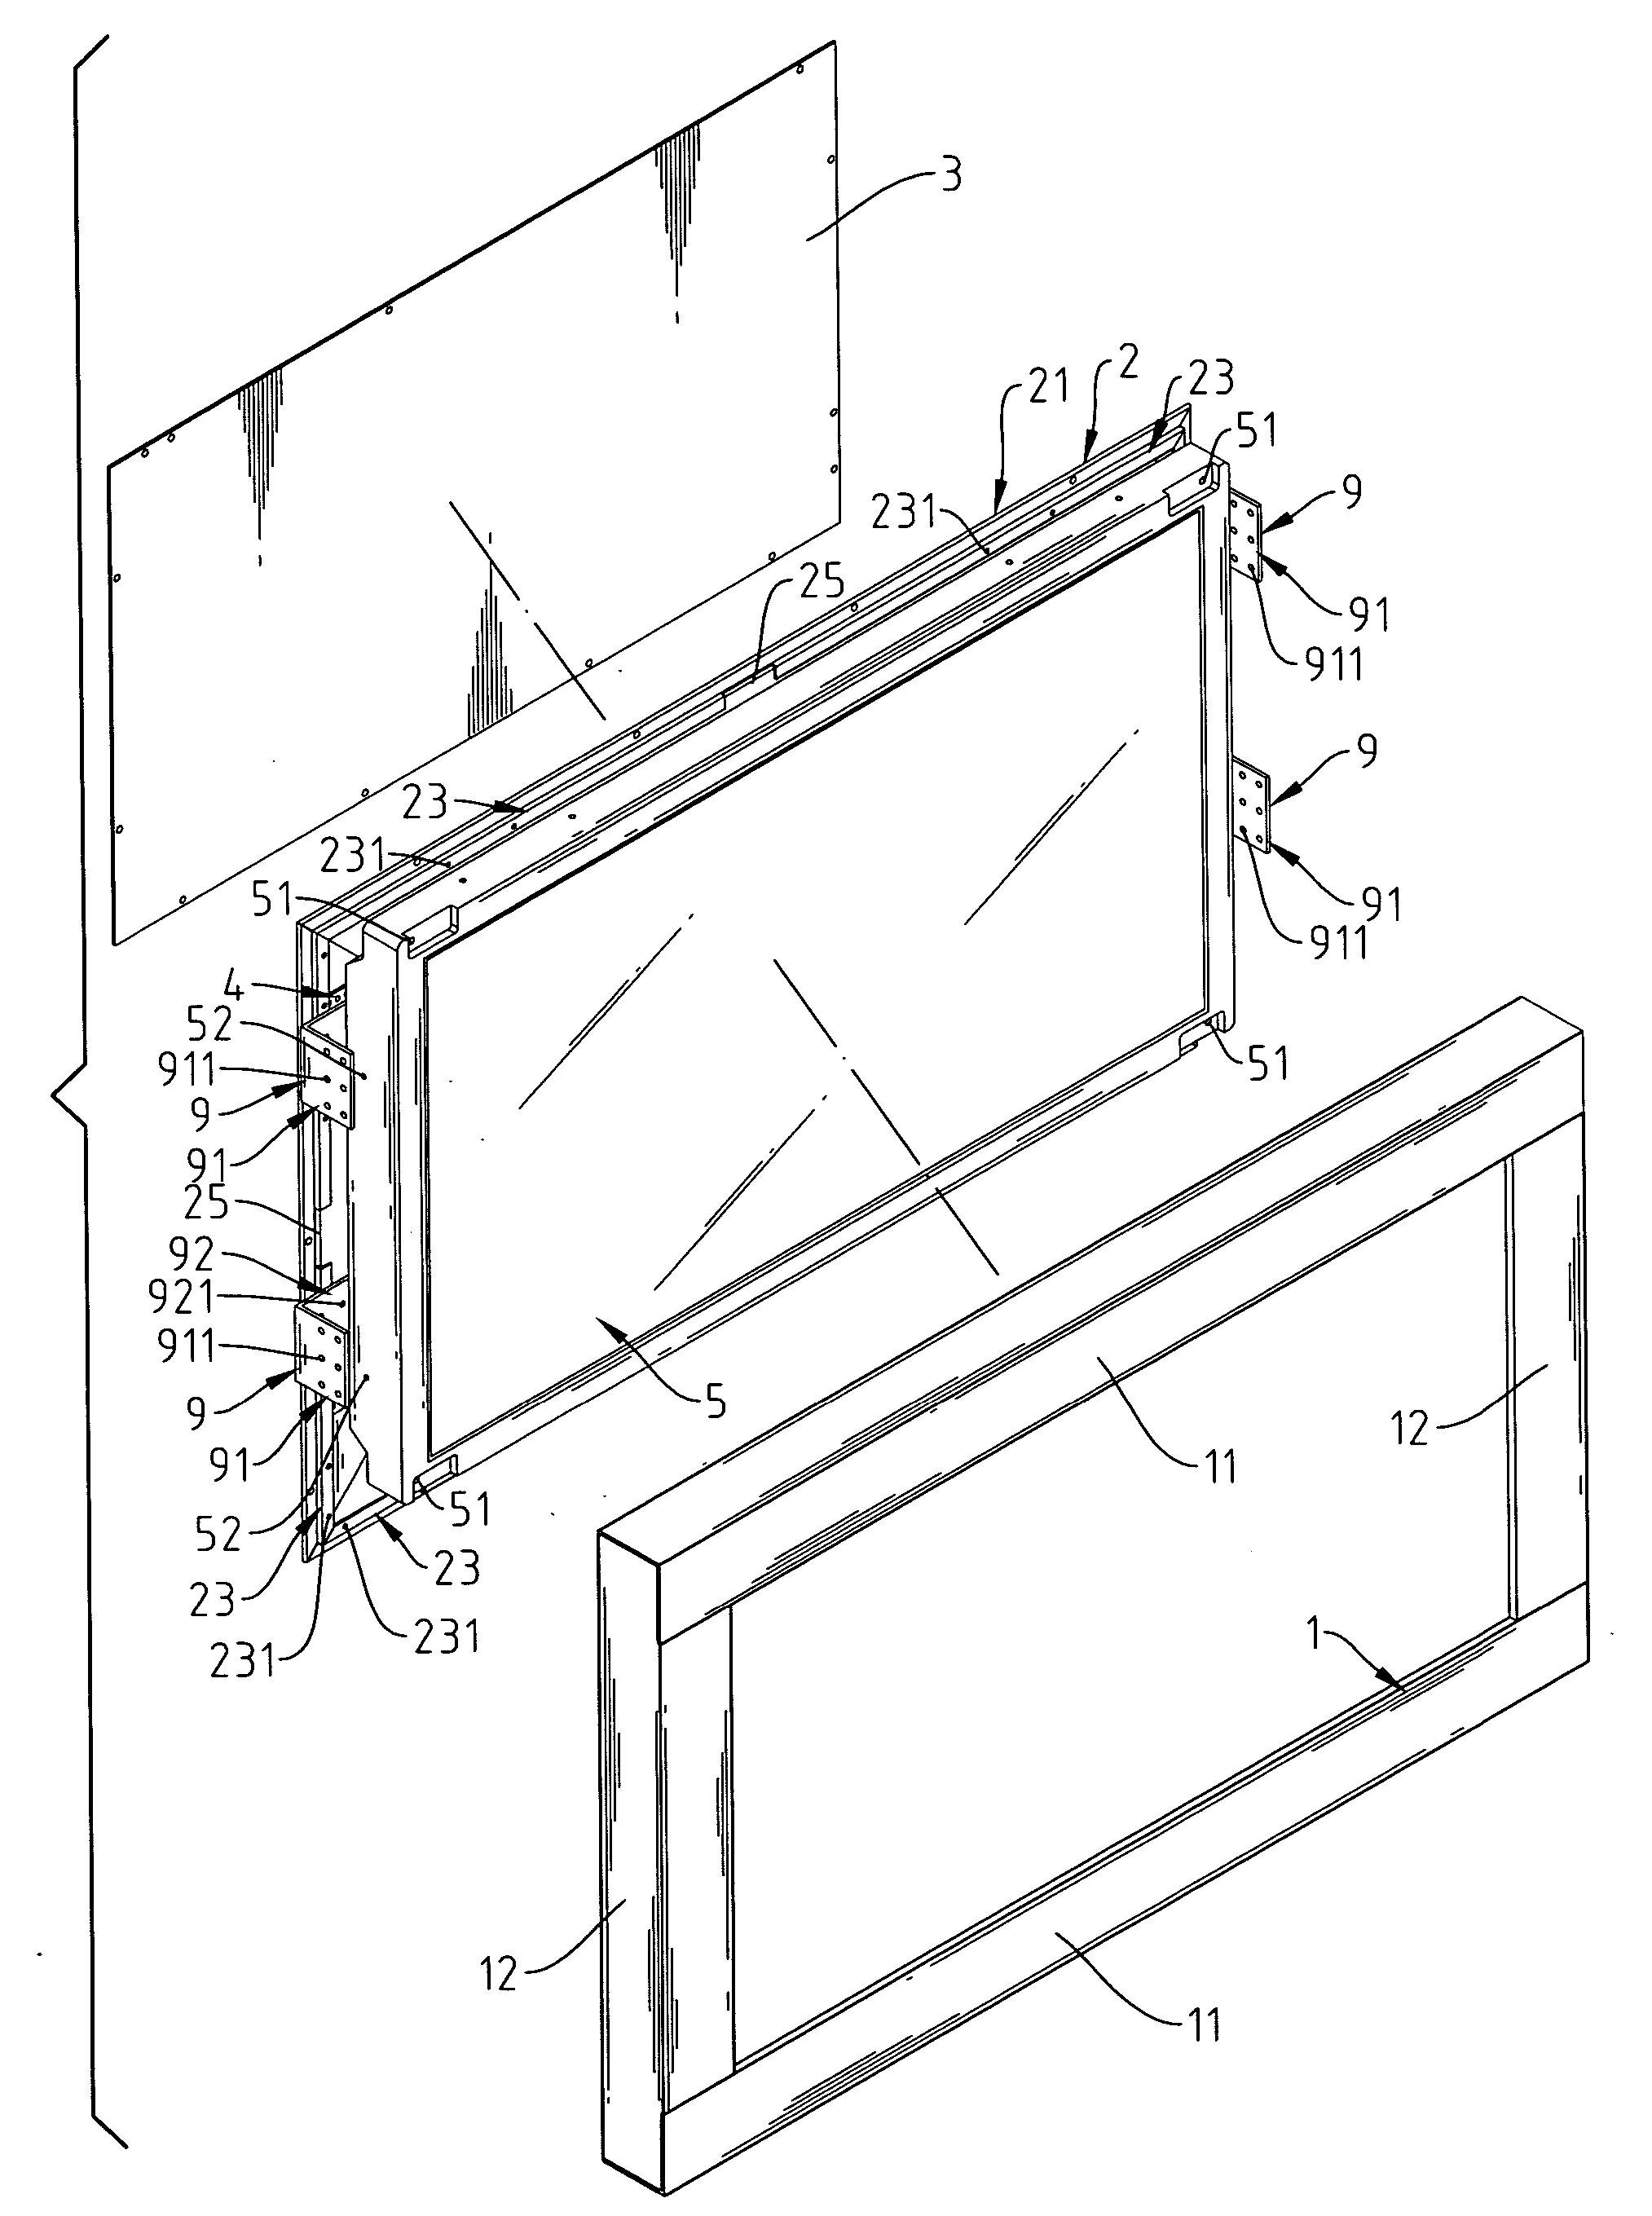 Composite structure of aluminum extrusion external framework of LCD monitor